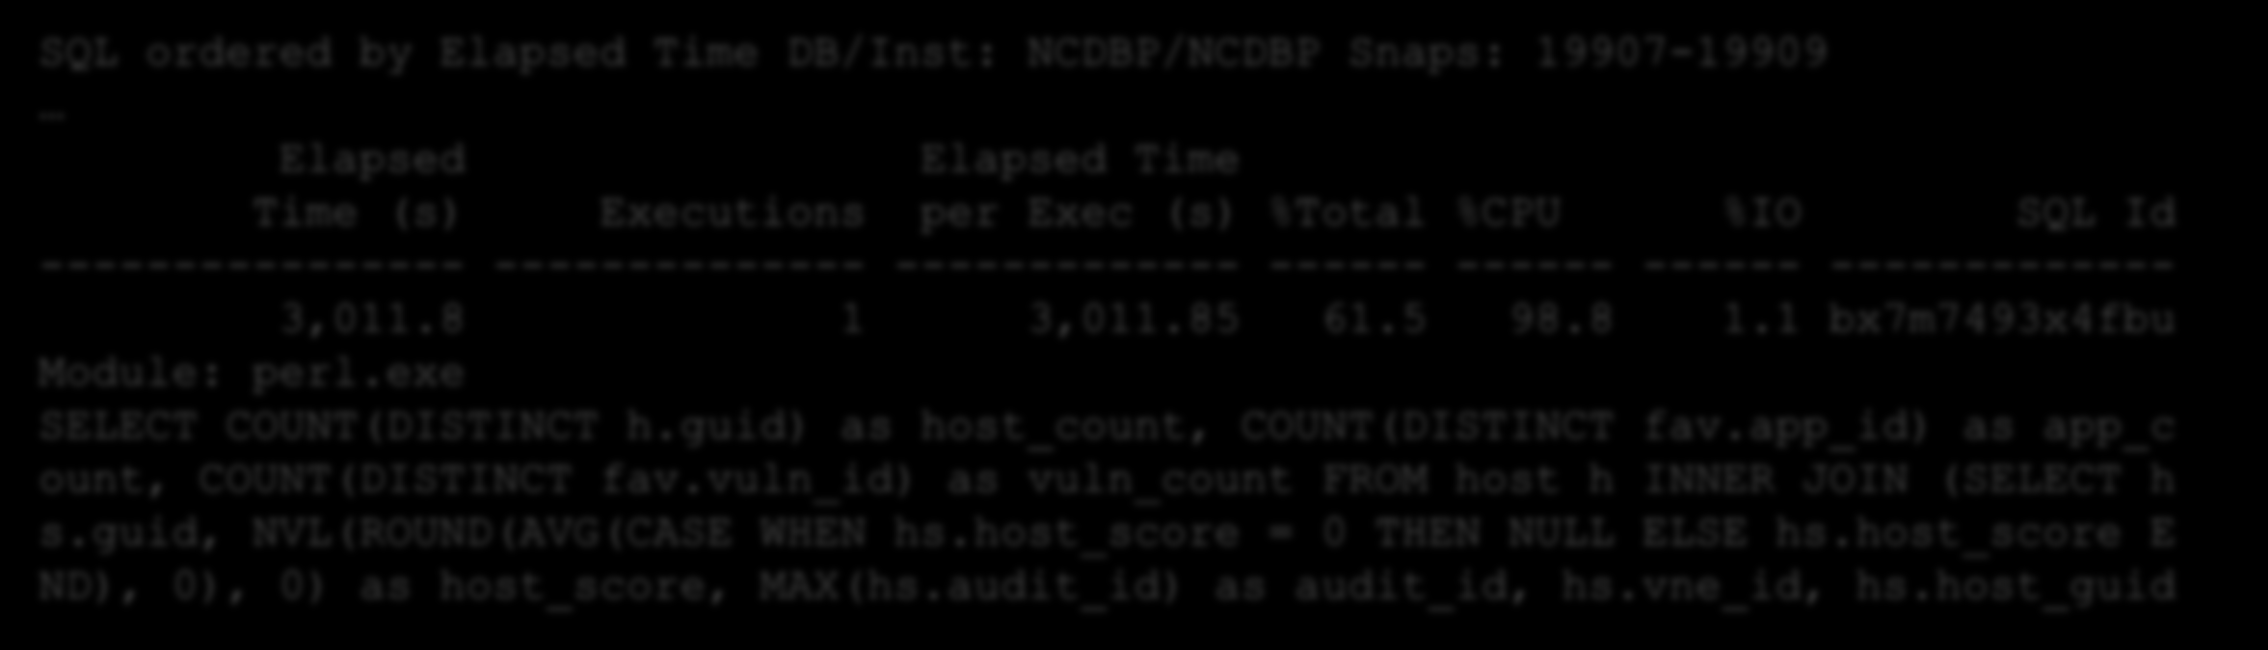 Statspack Report SQL ordered by Elapsed Time DB/Inst: NCDBP/NCDBP Snaps: 19907-19909 Elapsed Elapsed Time Time (s) Executions per Exec (s) %Total %CPU %IO SQL Id ---------------- --------------